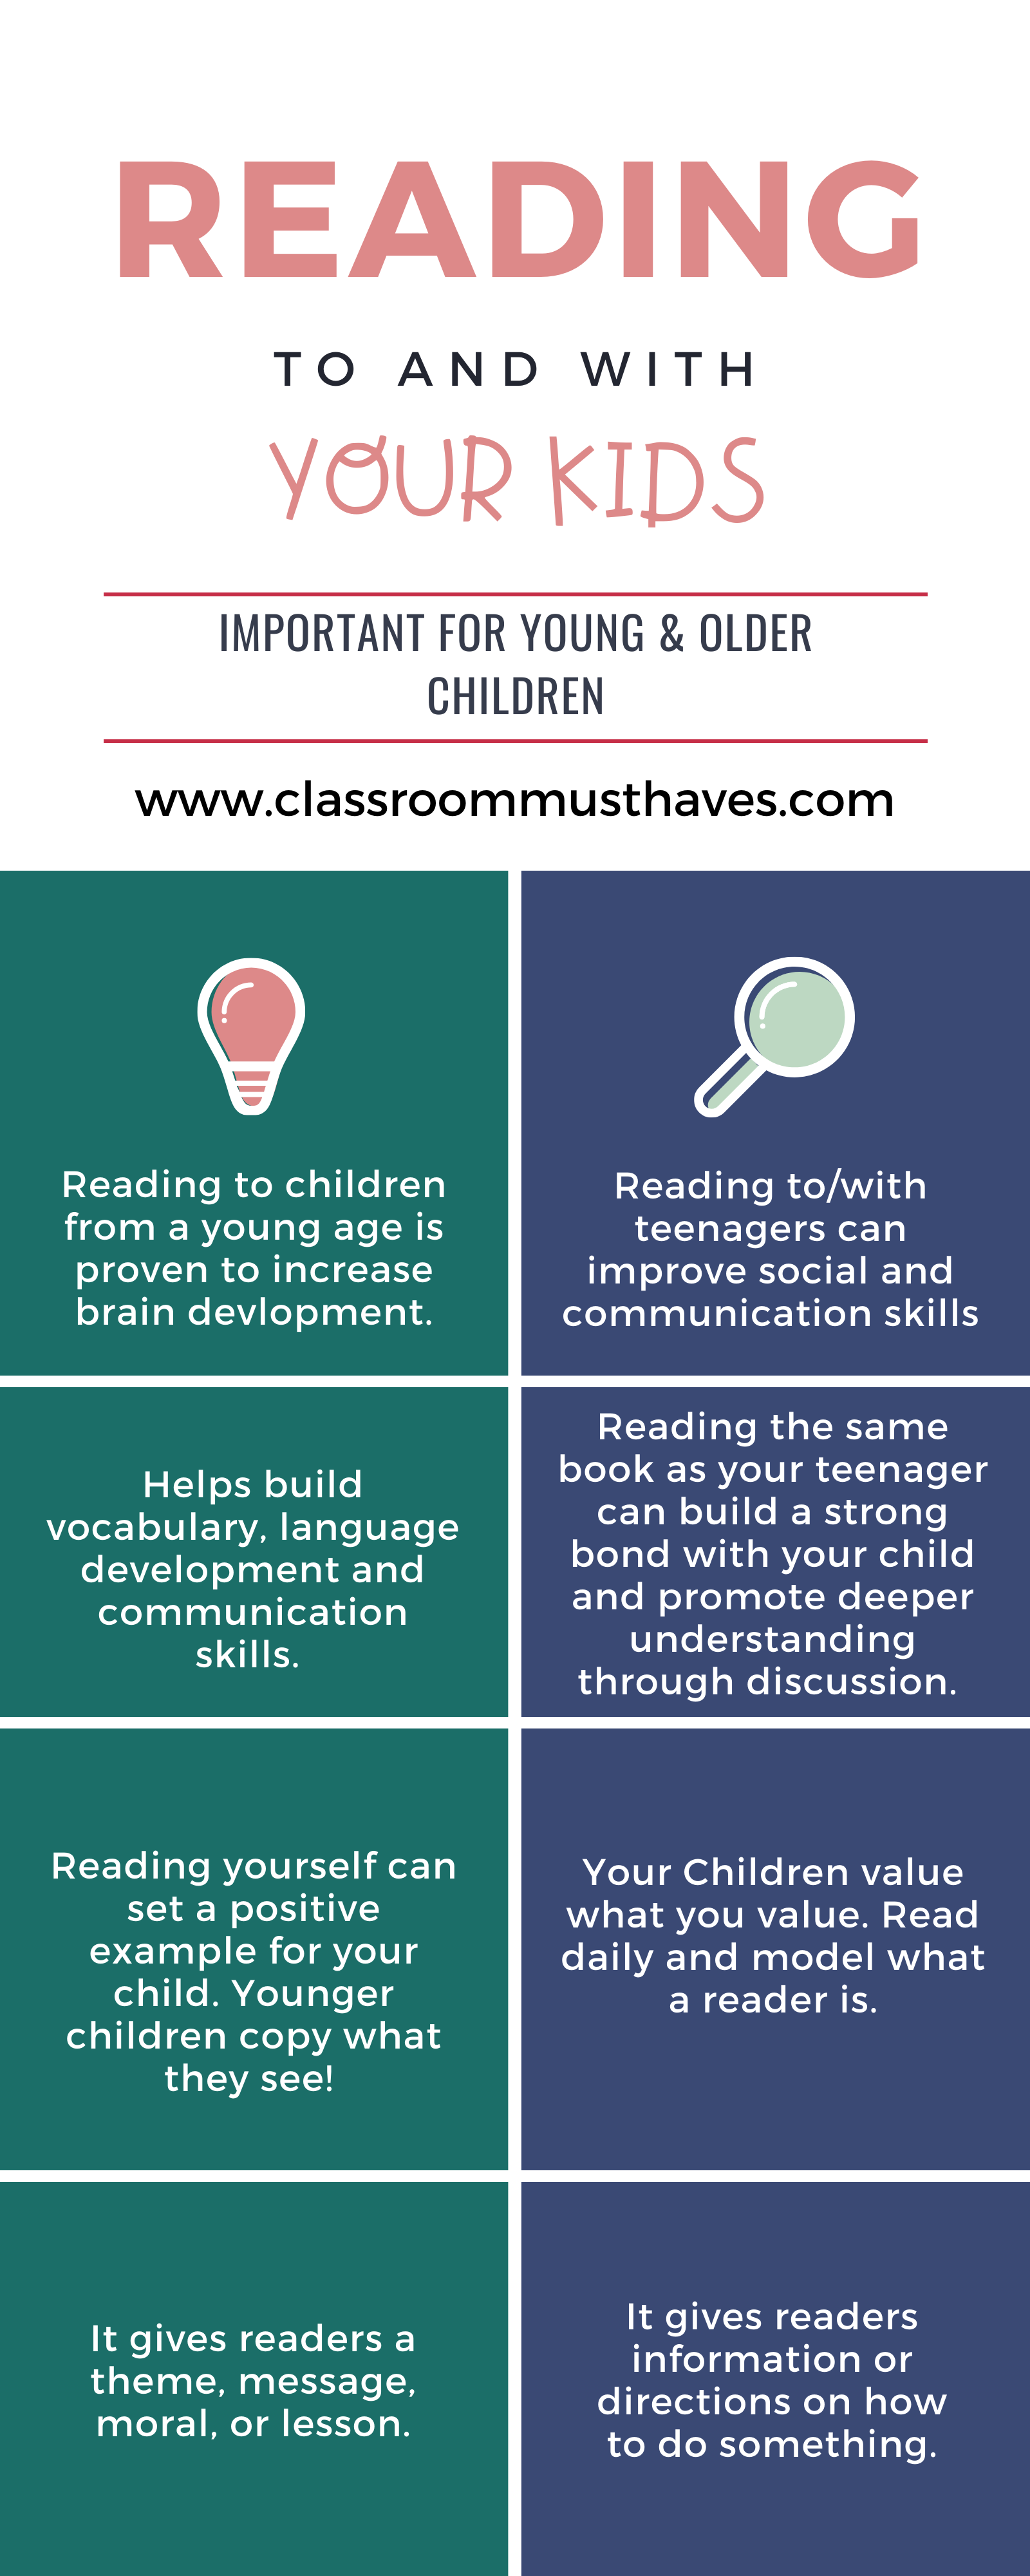 Importance of Reading to/with your children. How to help your child succeed in reading! www.classroommusthaves.com via @classroommusthaves